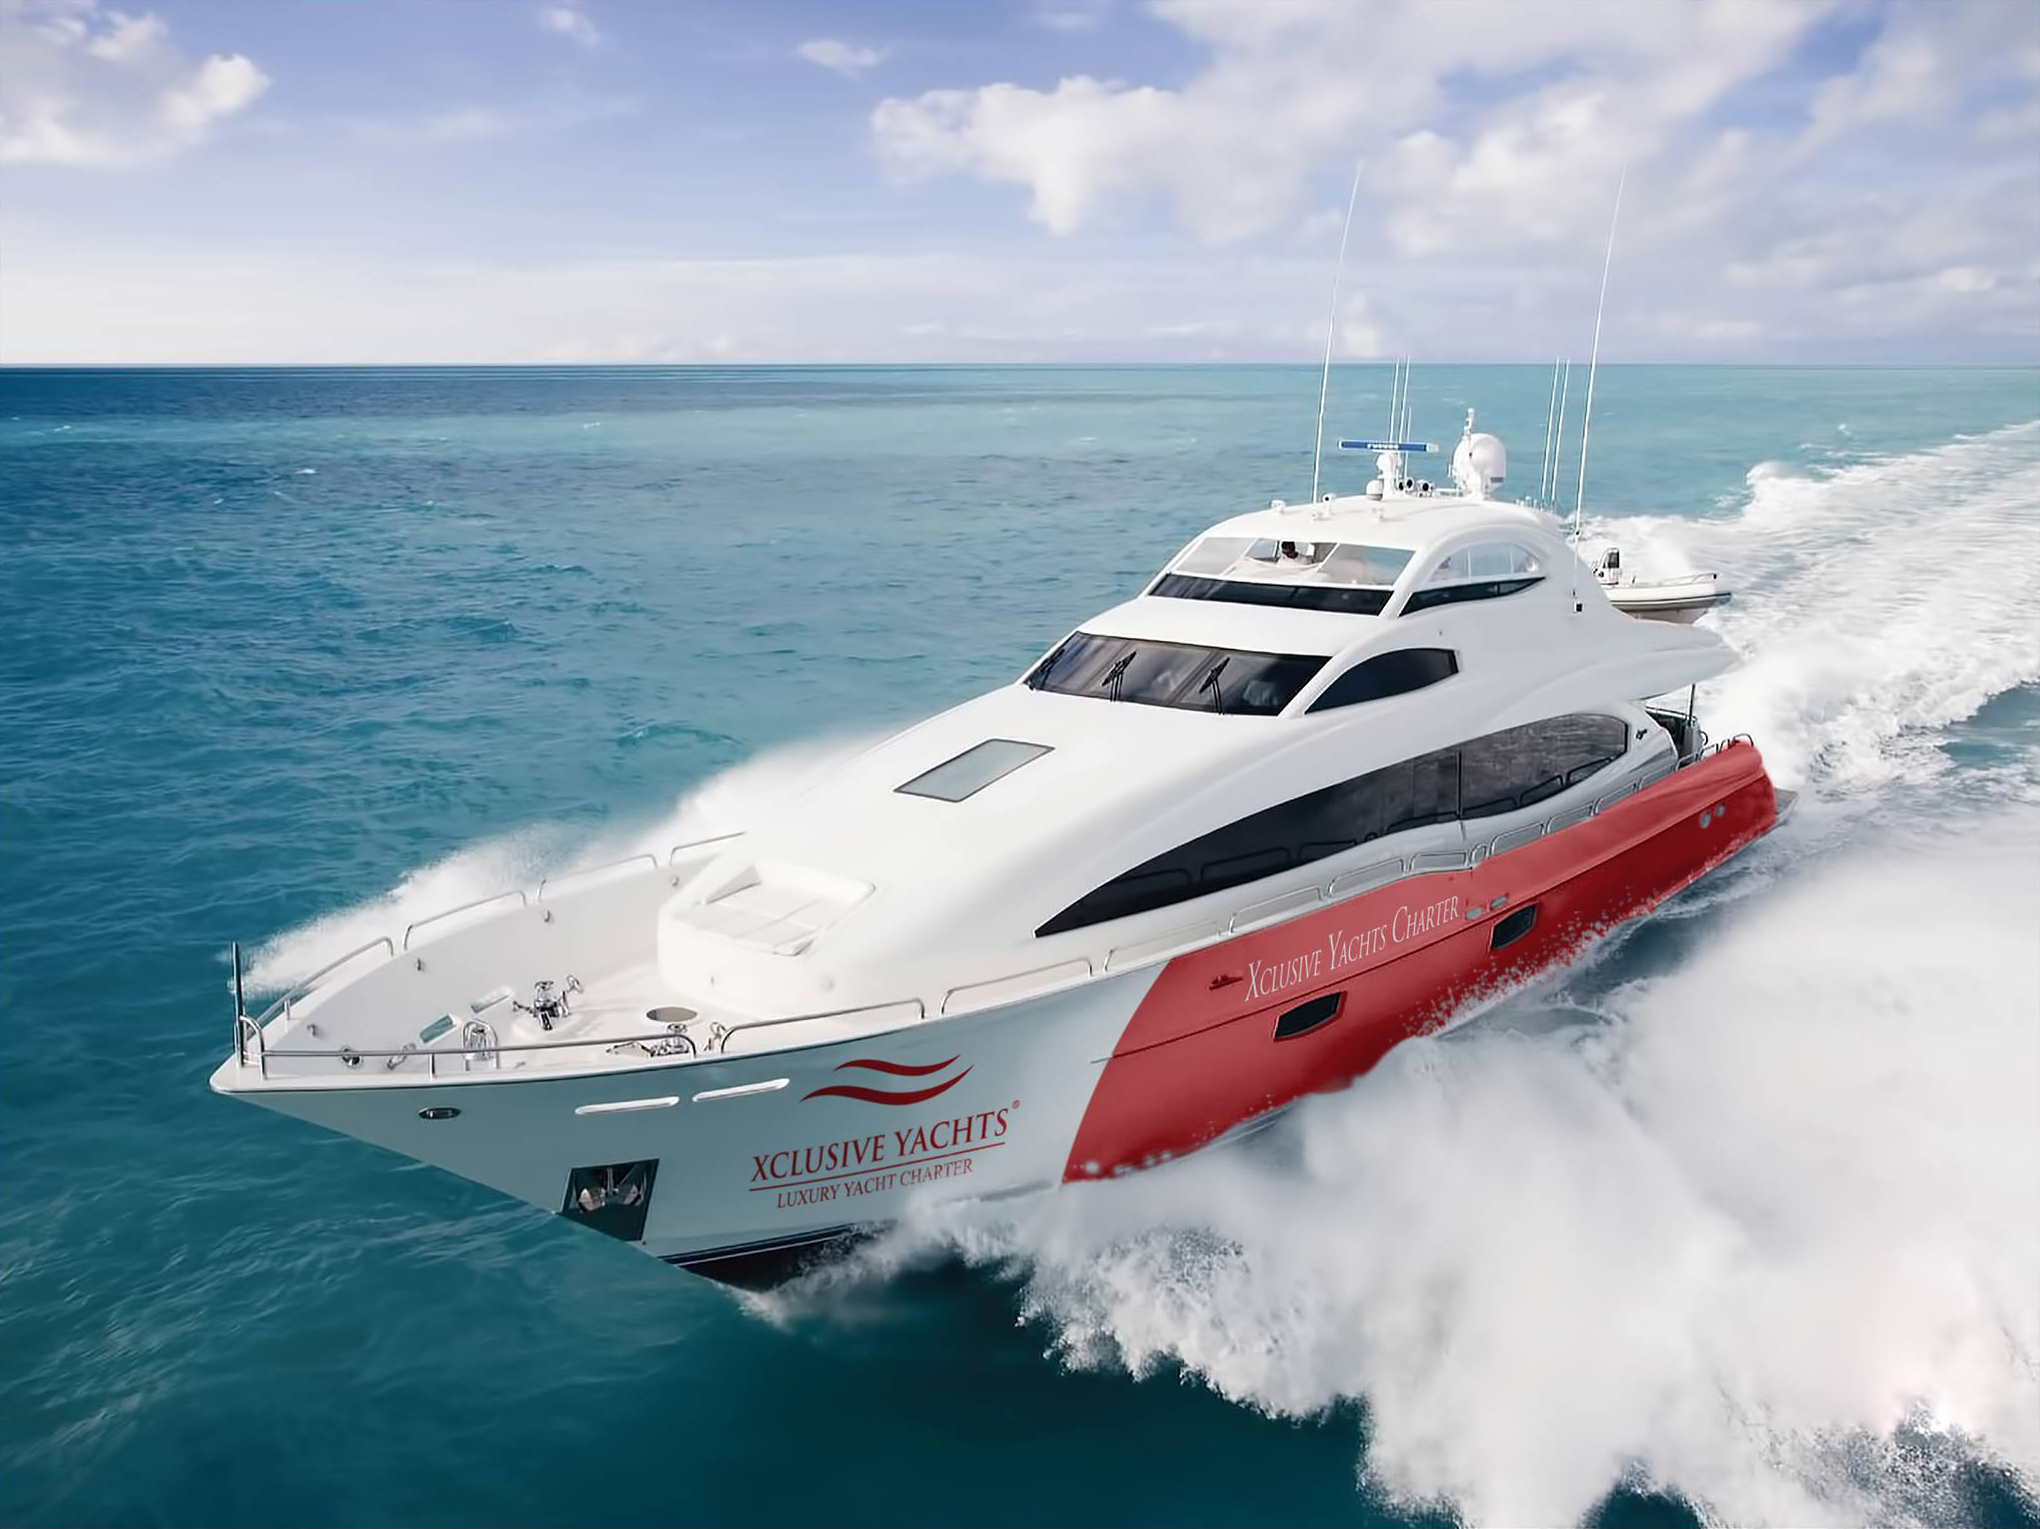 xclusive yachts reviews